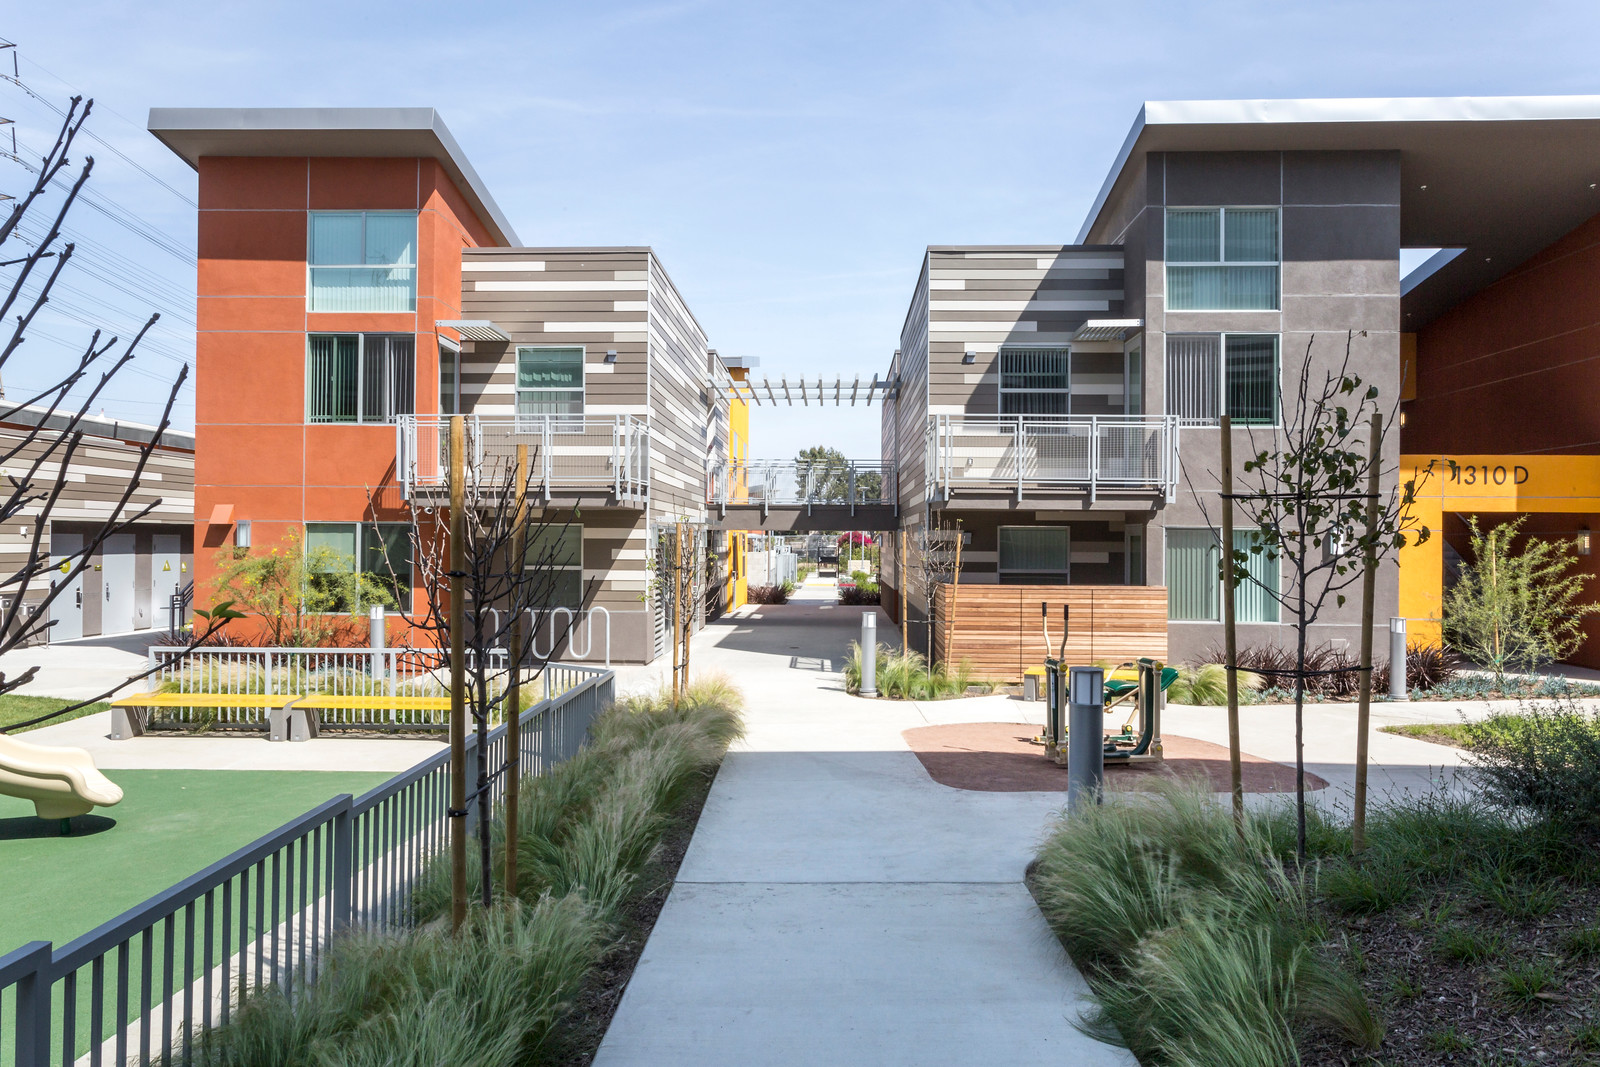 Exterior view of Sage Park Apartments community area. Paved walkways, landscaping, fenced in playgound with benches.